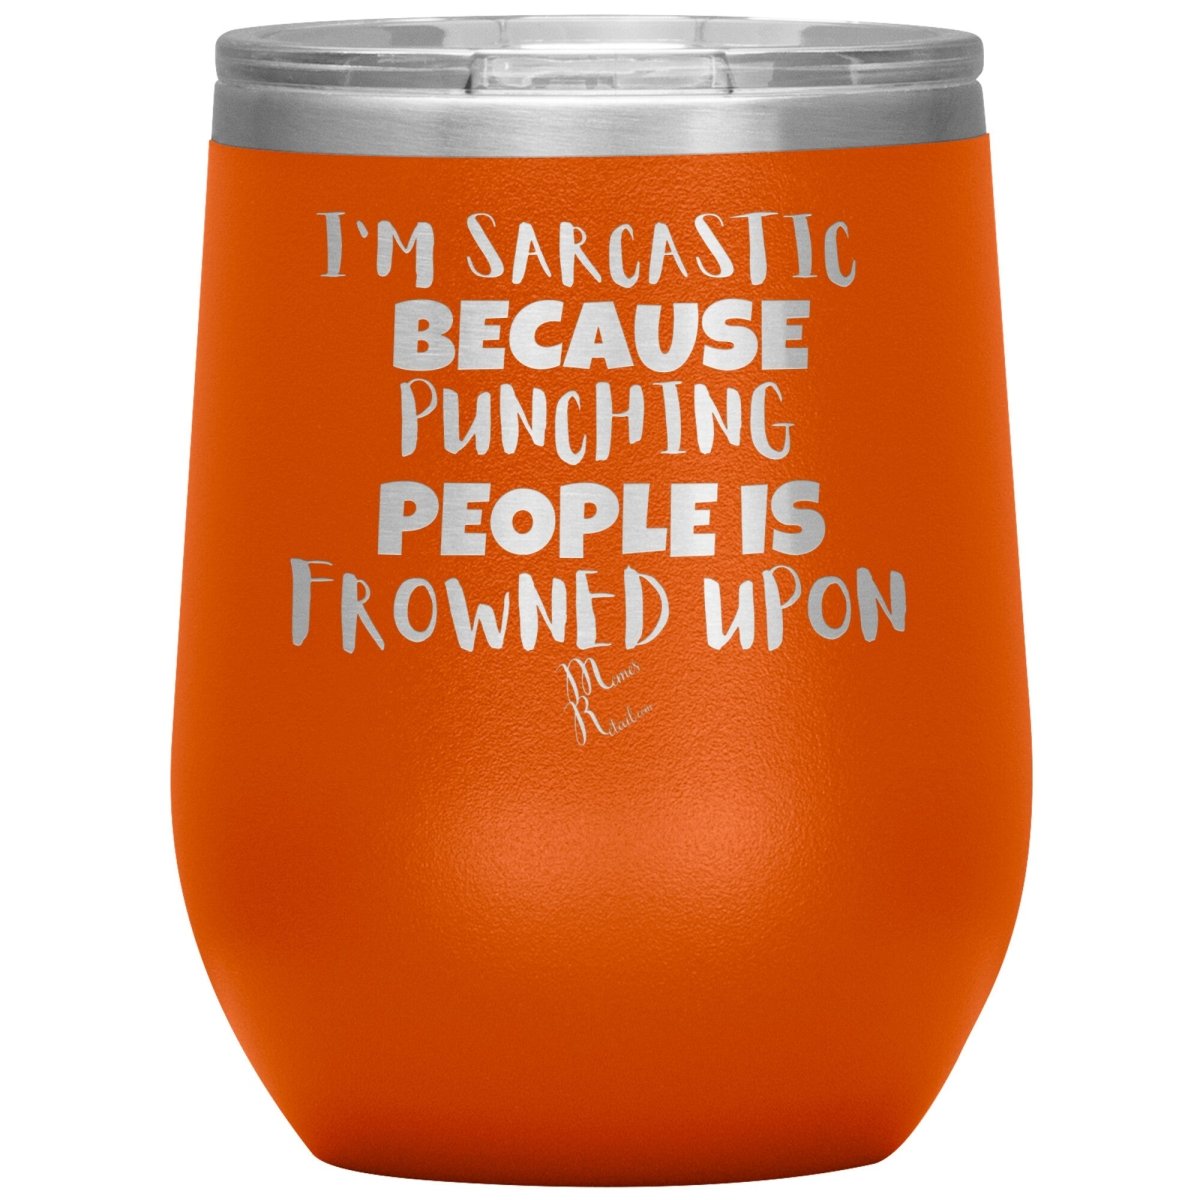 I'm Sarcastic Because Punching People is Frowned Upon Tumblers, 12oz Wine Insulated Tumbler / Orange - MemesRetail.com